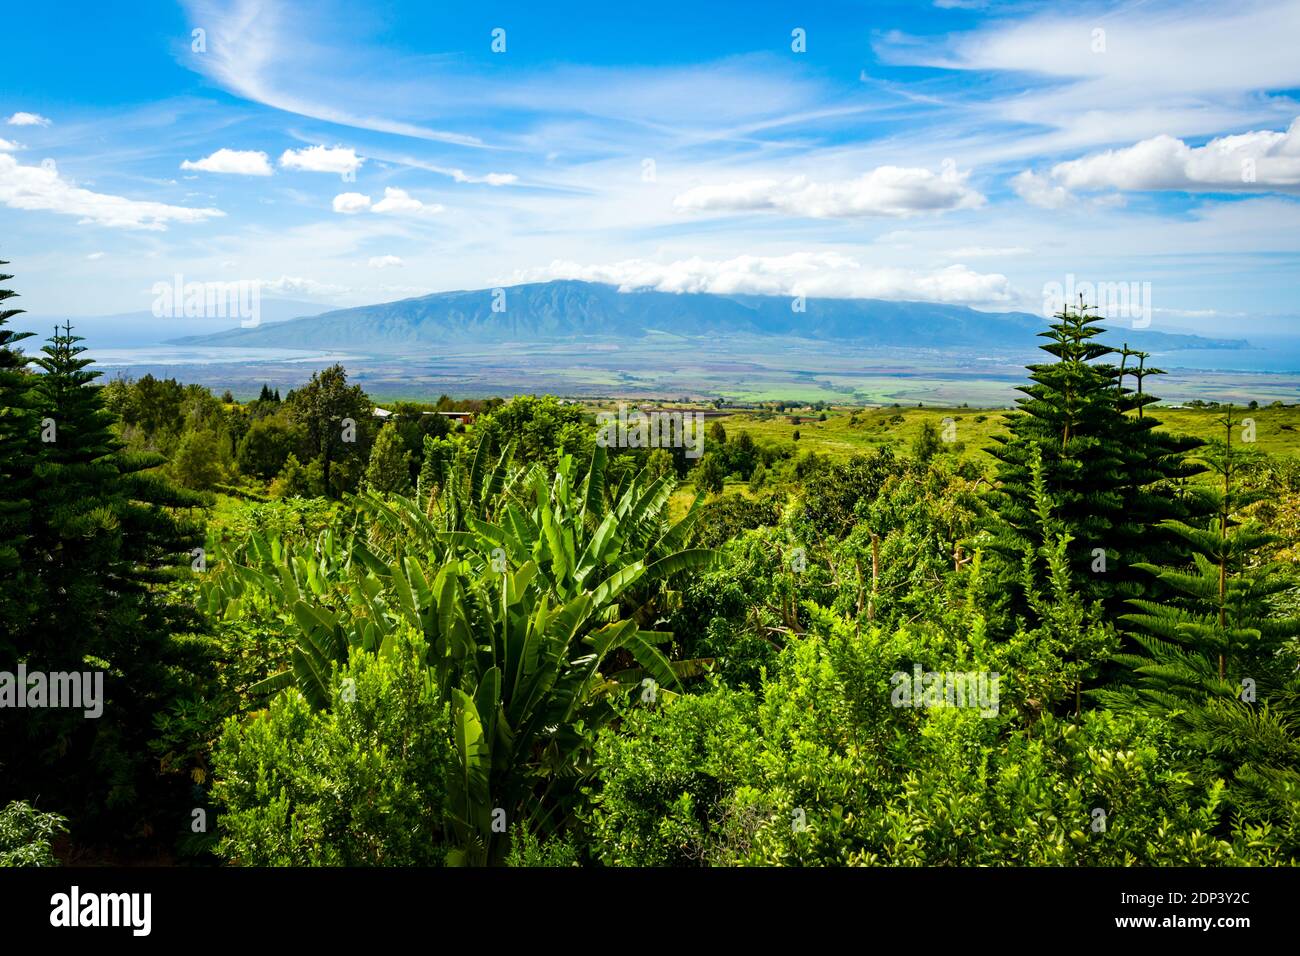 Maui, Hawaii, Upcountry, Sun Yat-Sen Memorial Park, Nearby View of Central Maui Stock Photo